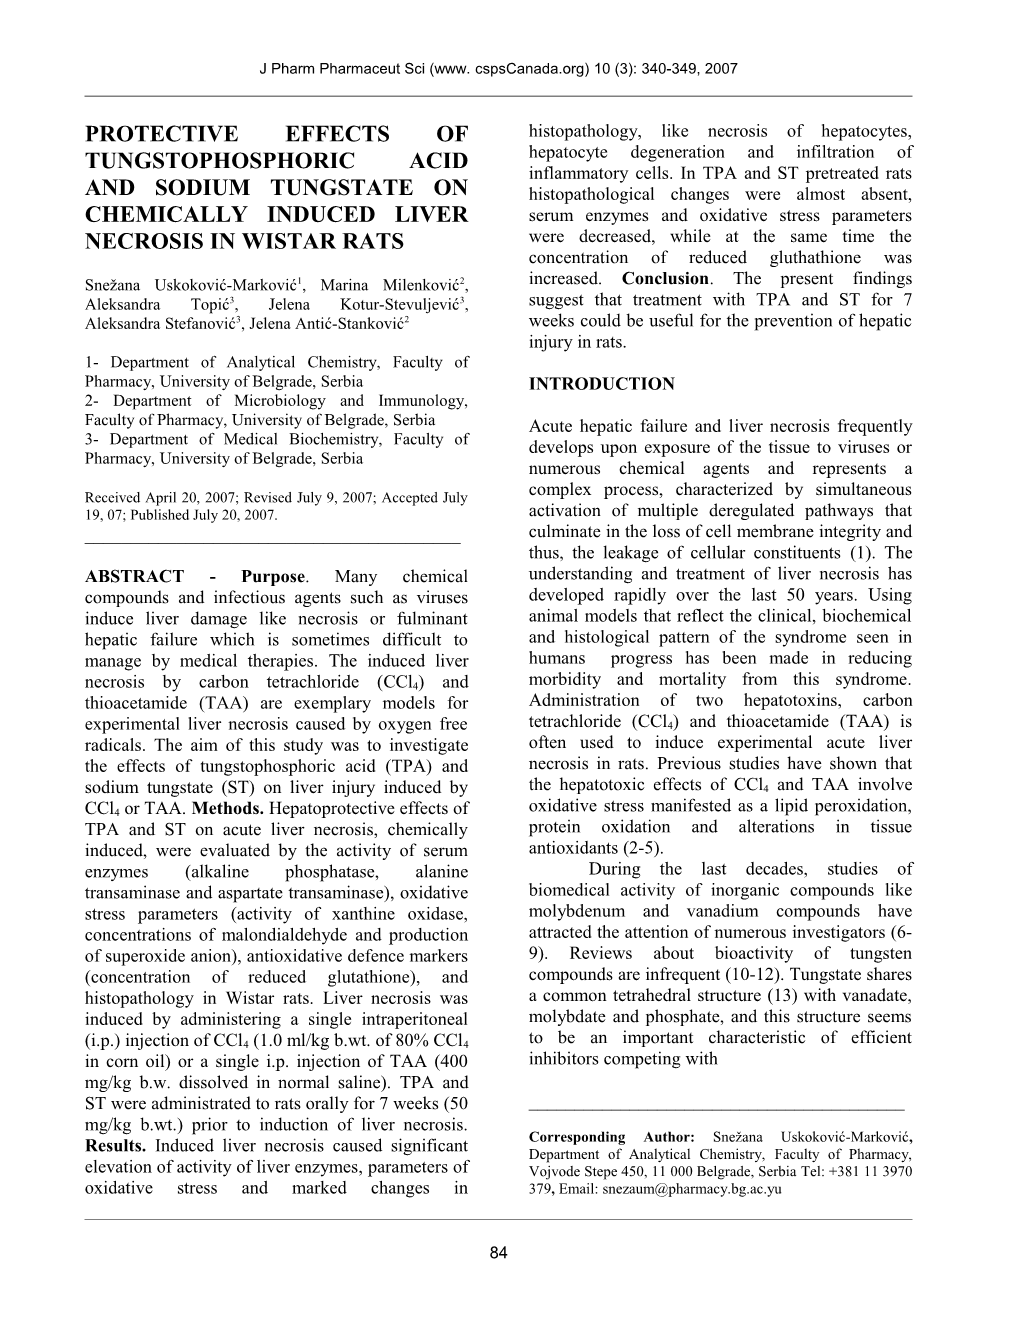 Protective Effects of Tungstophosphoric Acid and Sodium Tungstate on Chemically Induced